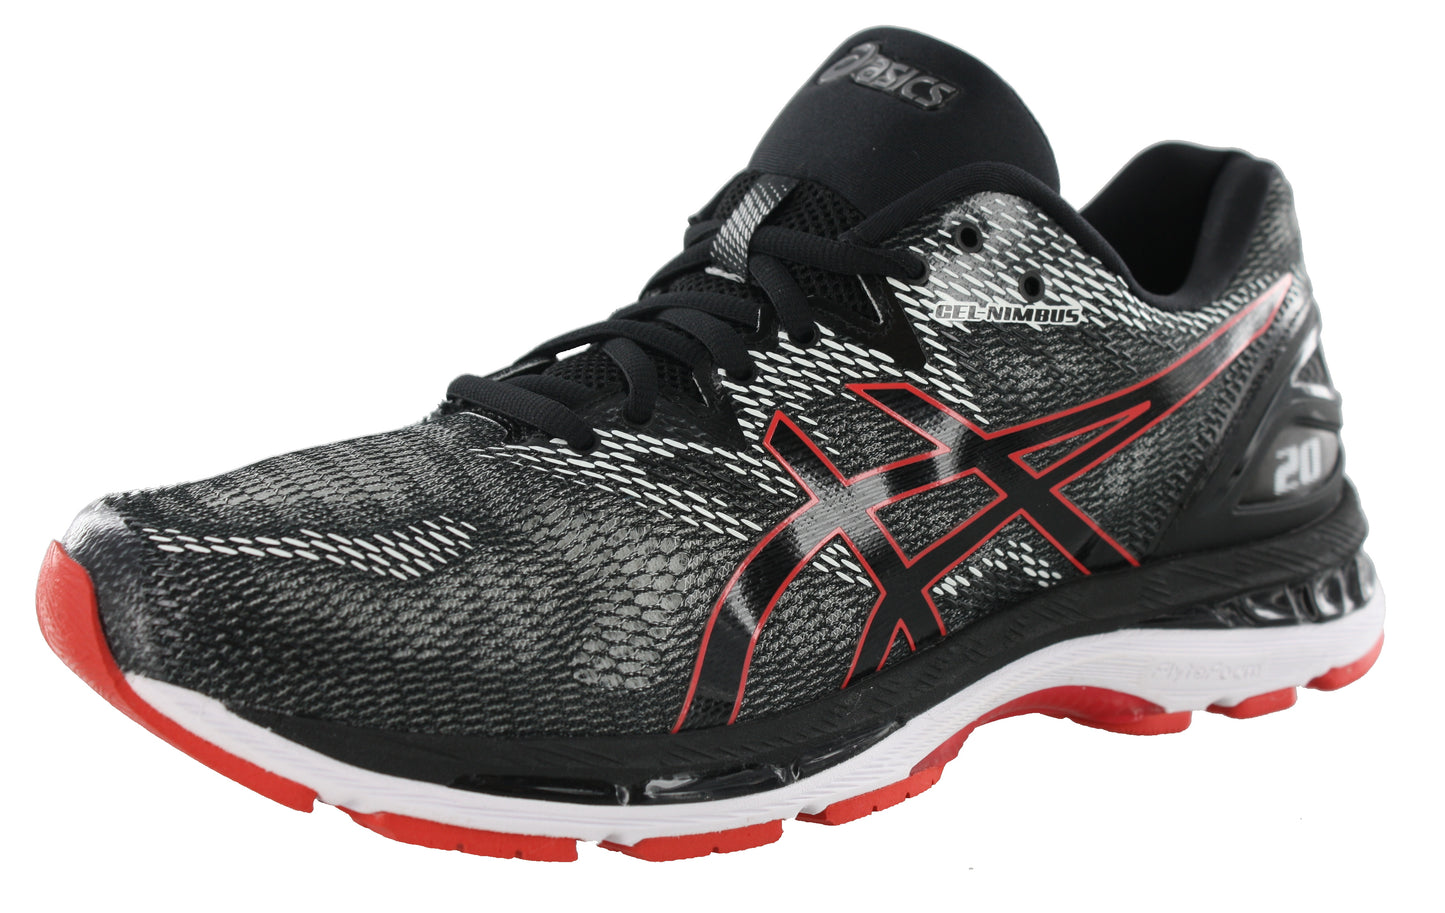 
                  
                    Lateral of Black with Red Alert, Grey, and White accents ASICS Men Walking Trail Cushioned Running Shoes Gel Nimbus 20
                  
                